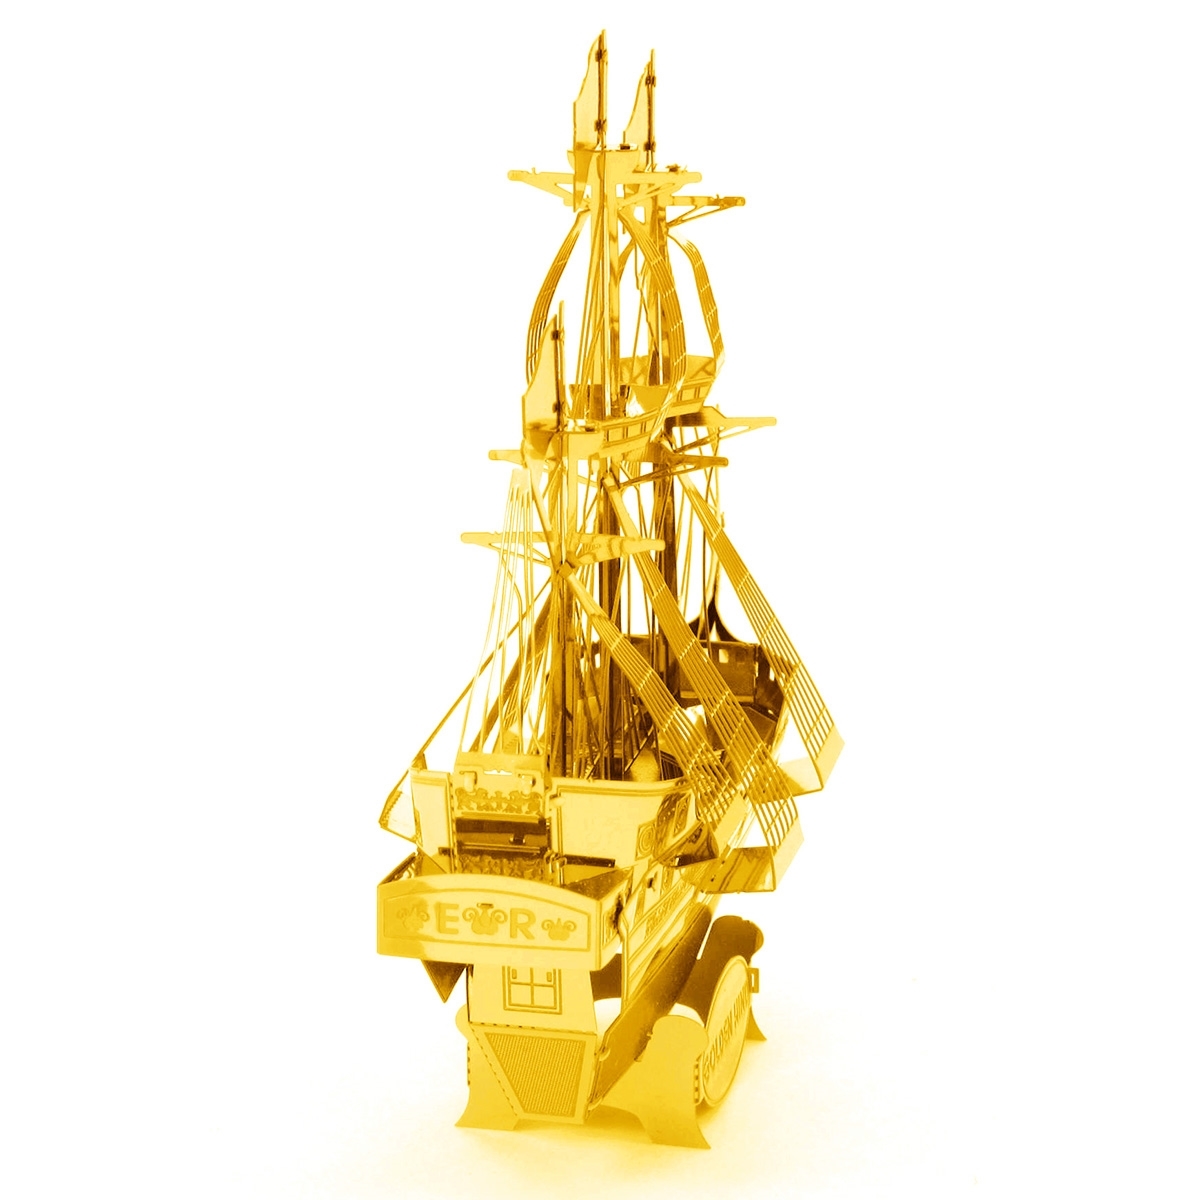 Details about   Tenyo Metallic Nano Puzzle  Gold Series Golden Hind 